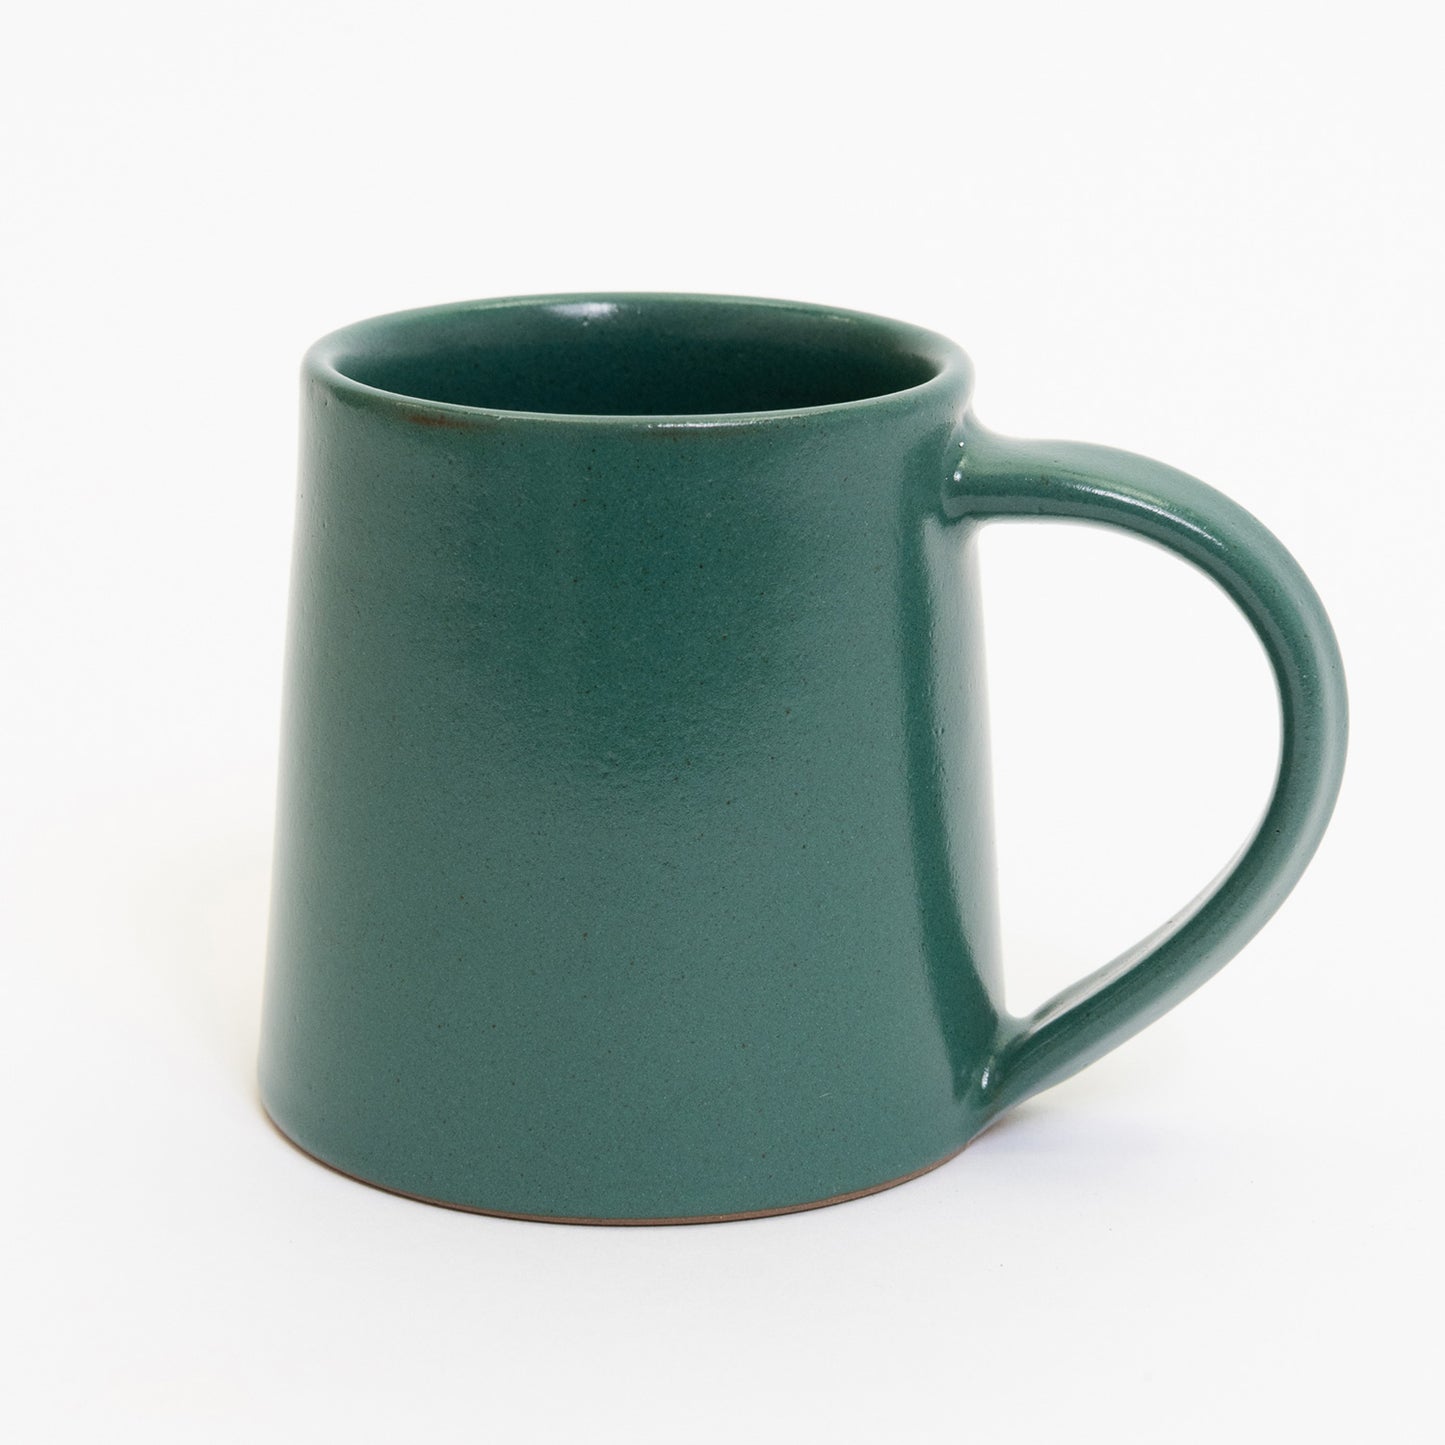 A teal coloured stoneware mug pictured on a white background.